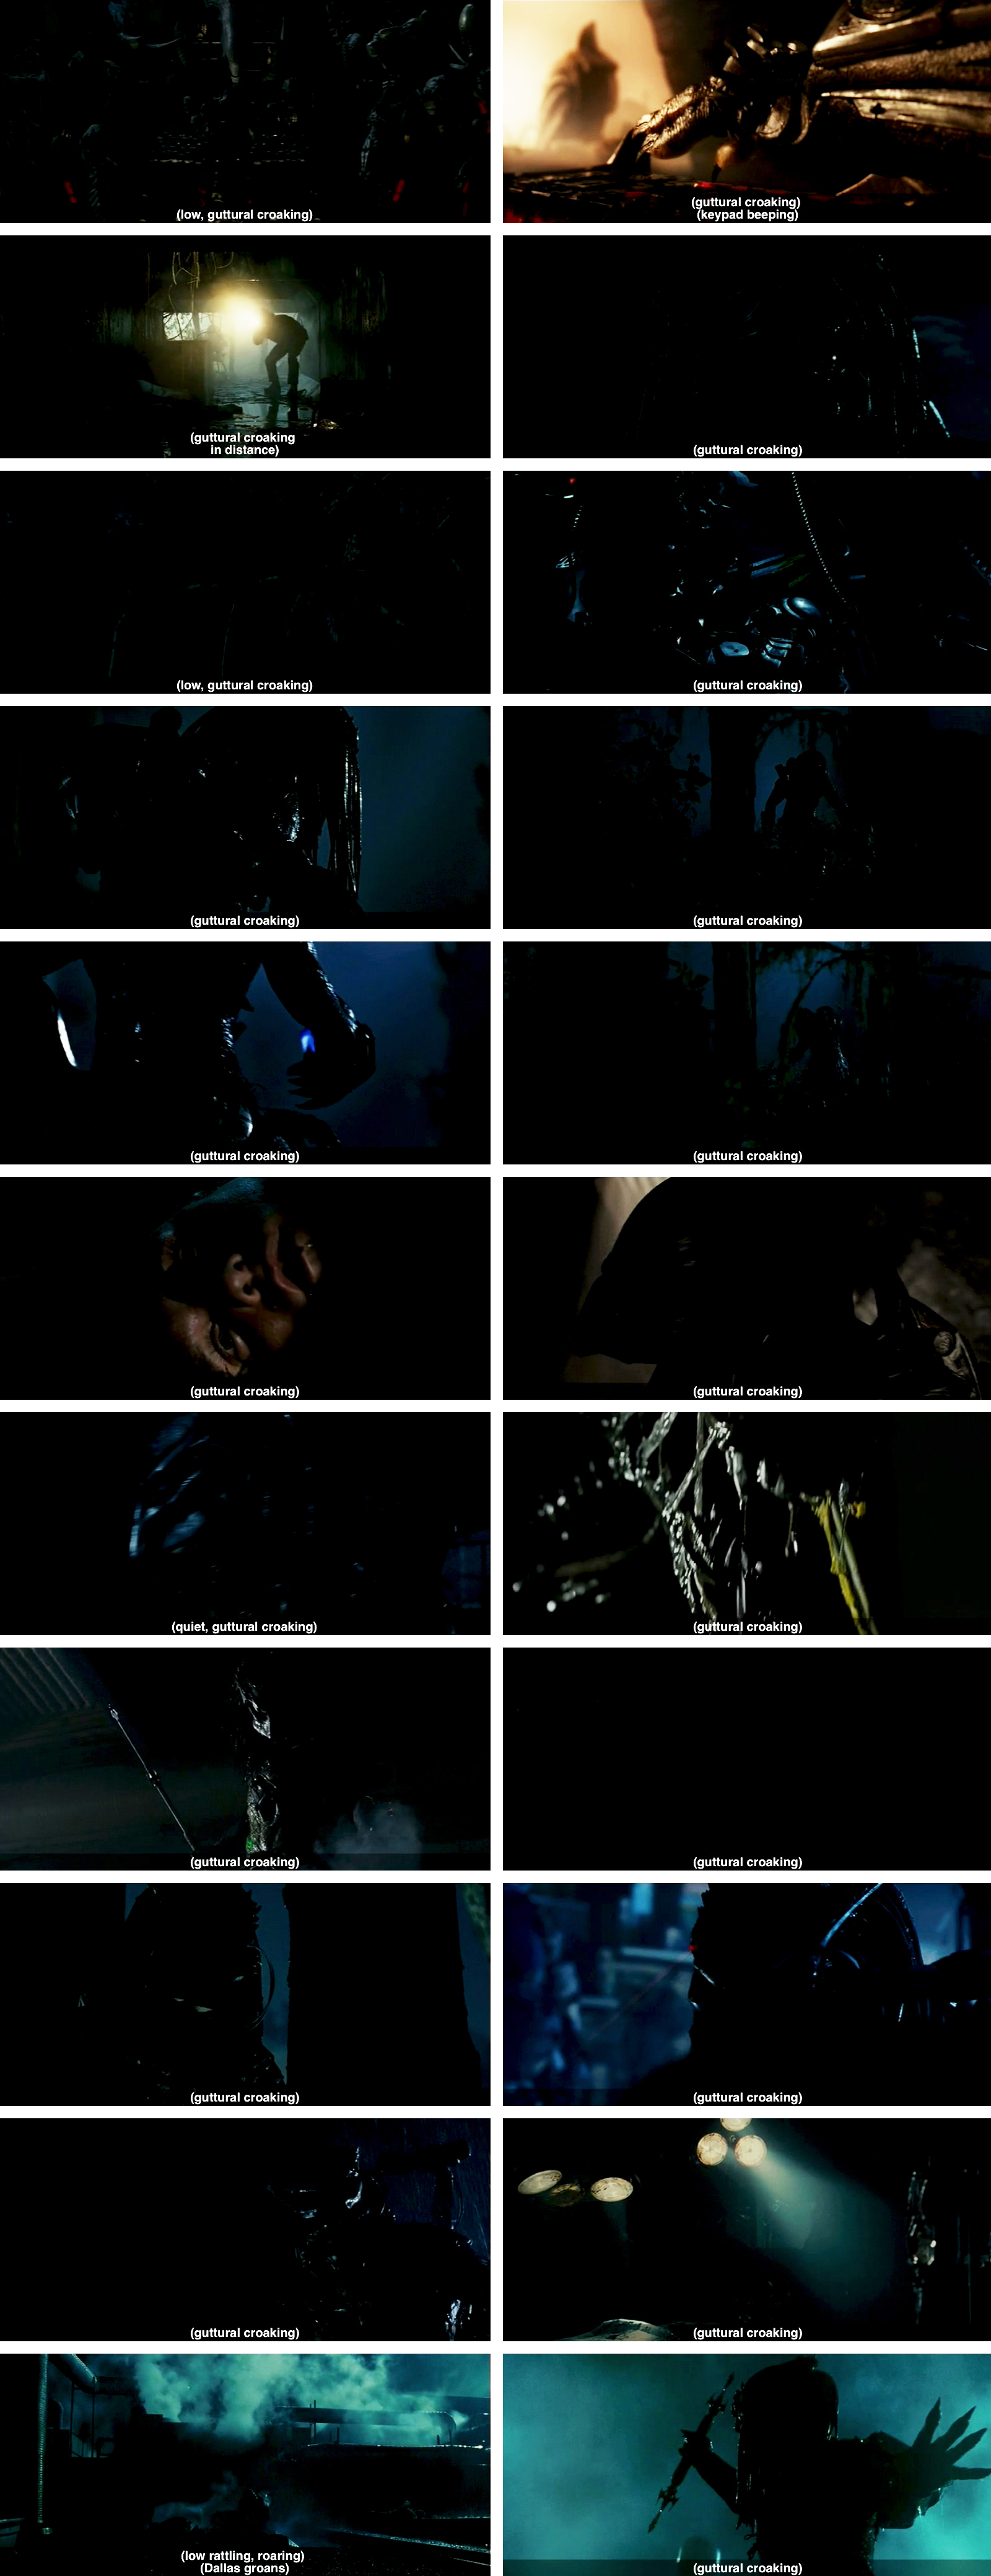 A compilation of 22 frames from Aliens vs. Predator: Requiem (2007). Each frame features a 'guttural croaking' caption